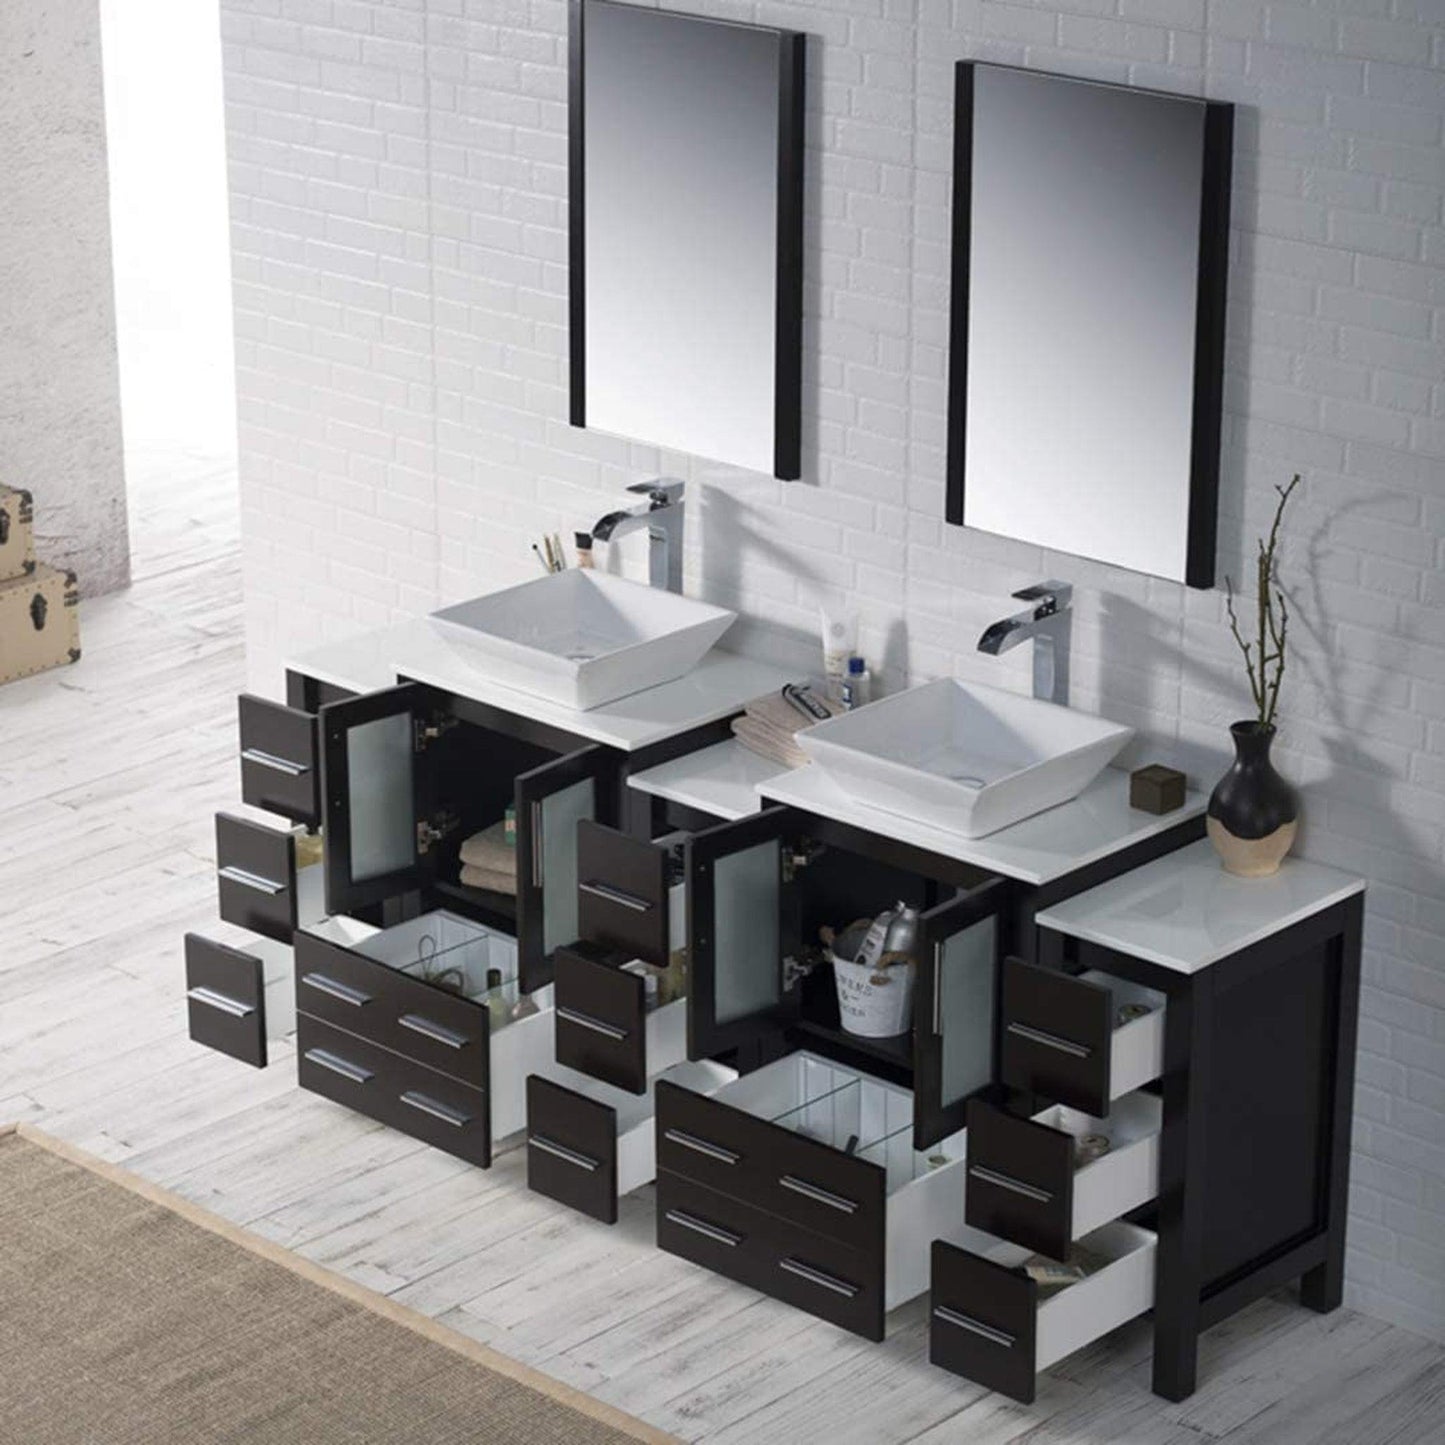 Blossom Sydney 84" Espresso Freestanding Vanity With Ceramic Double Vessel Sinks and Three Side Cabinet